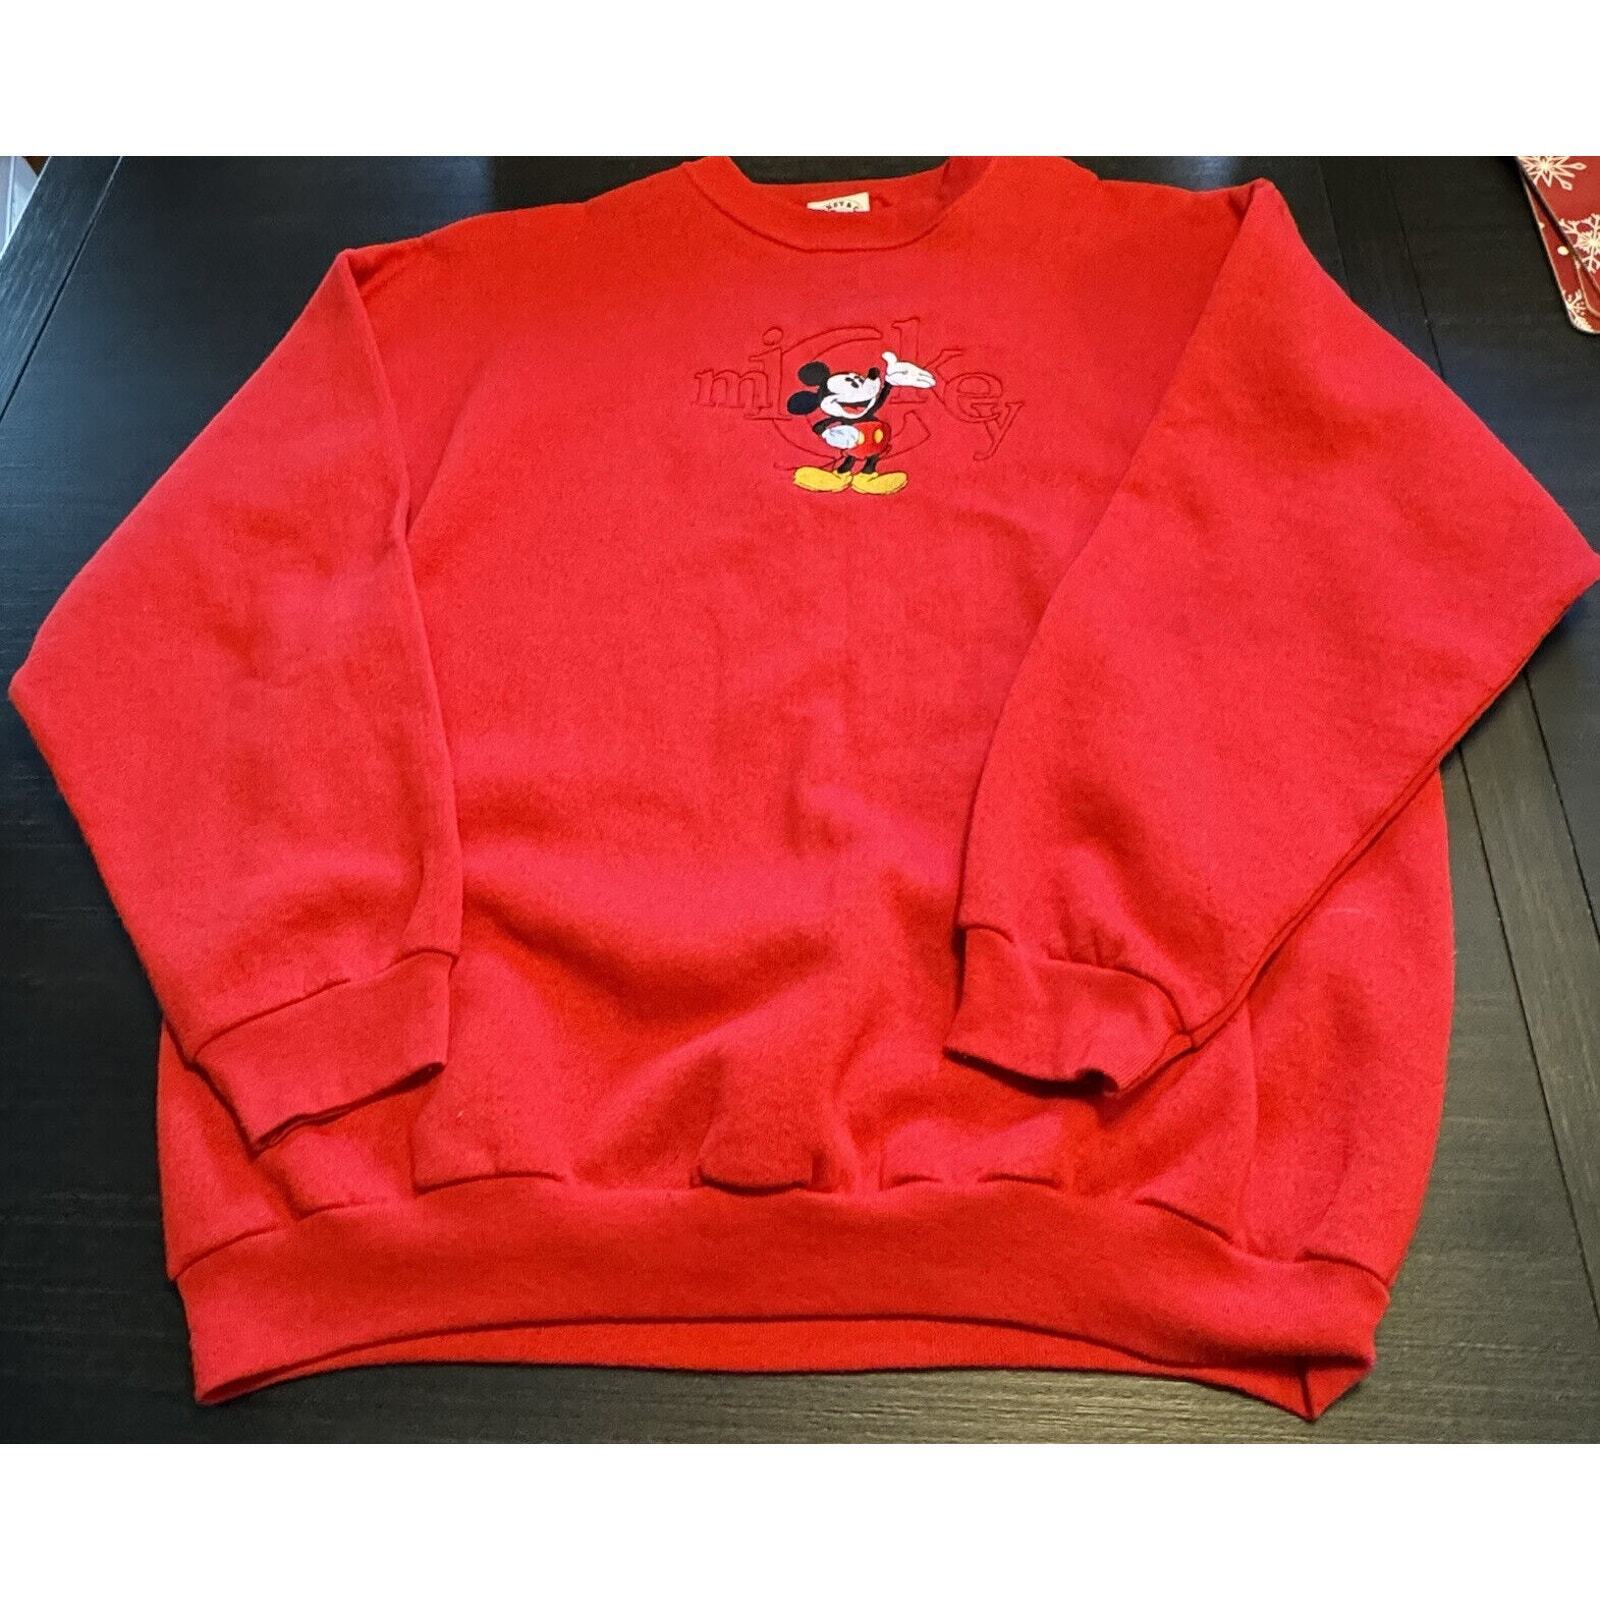 Mickey & Co Vintage 90s Made In USA Sweatshirt Unisex Xl see pics and desc